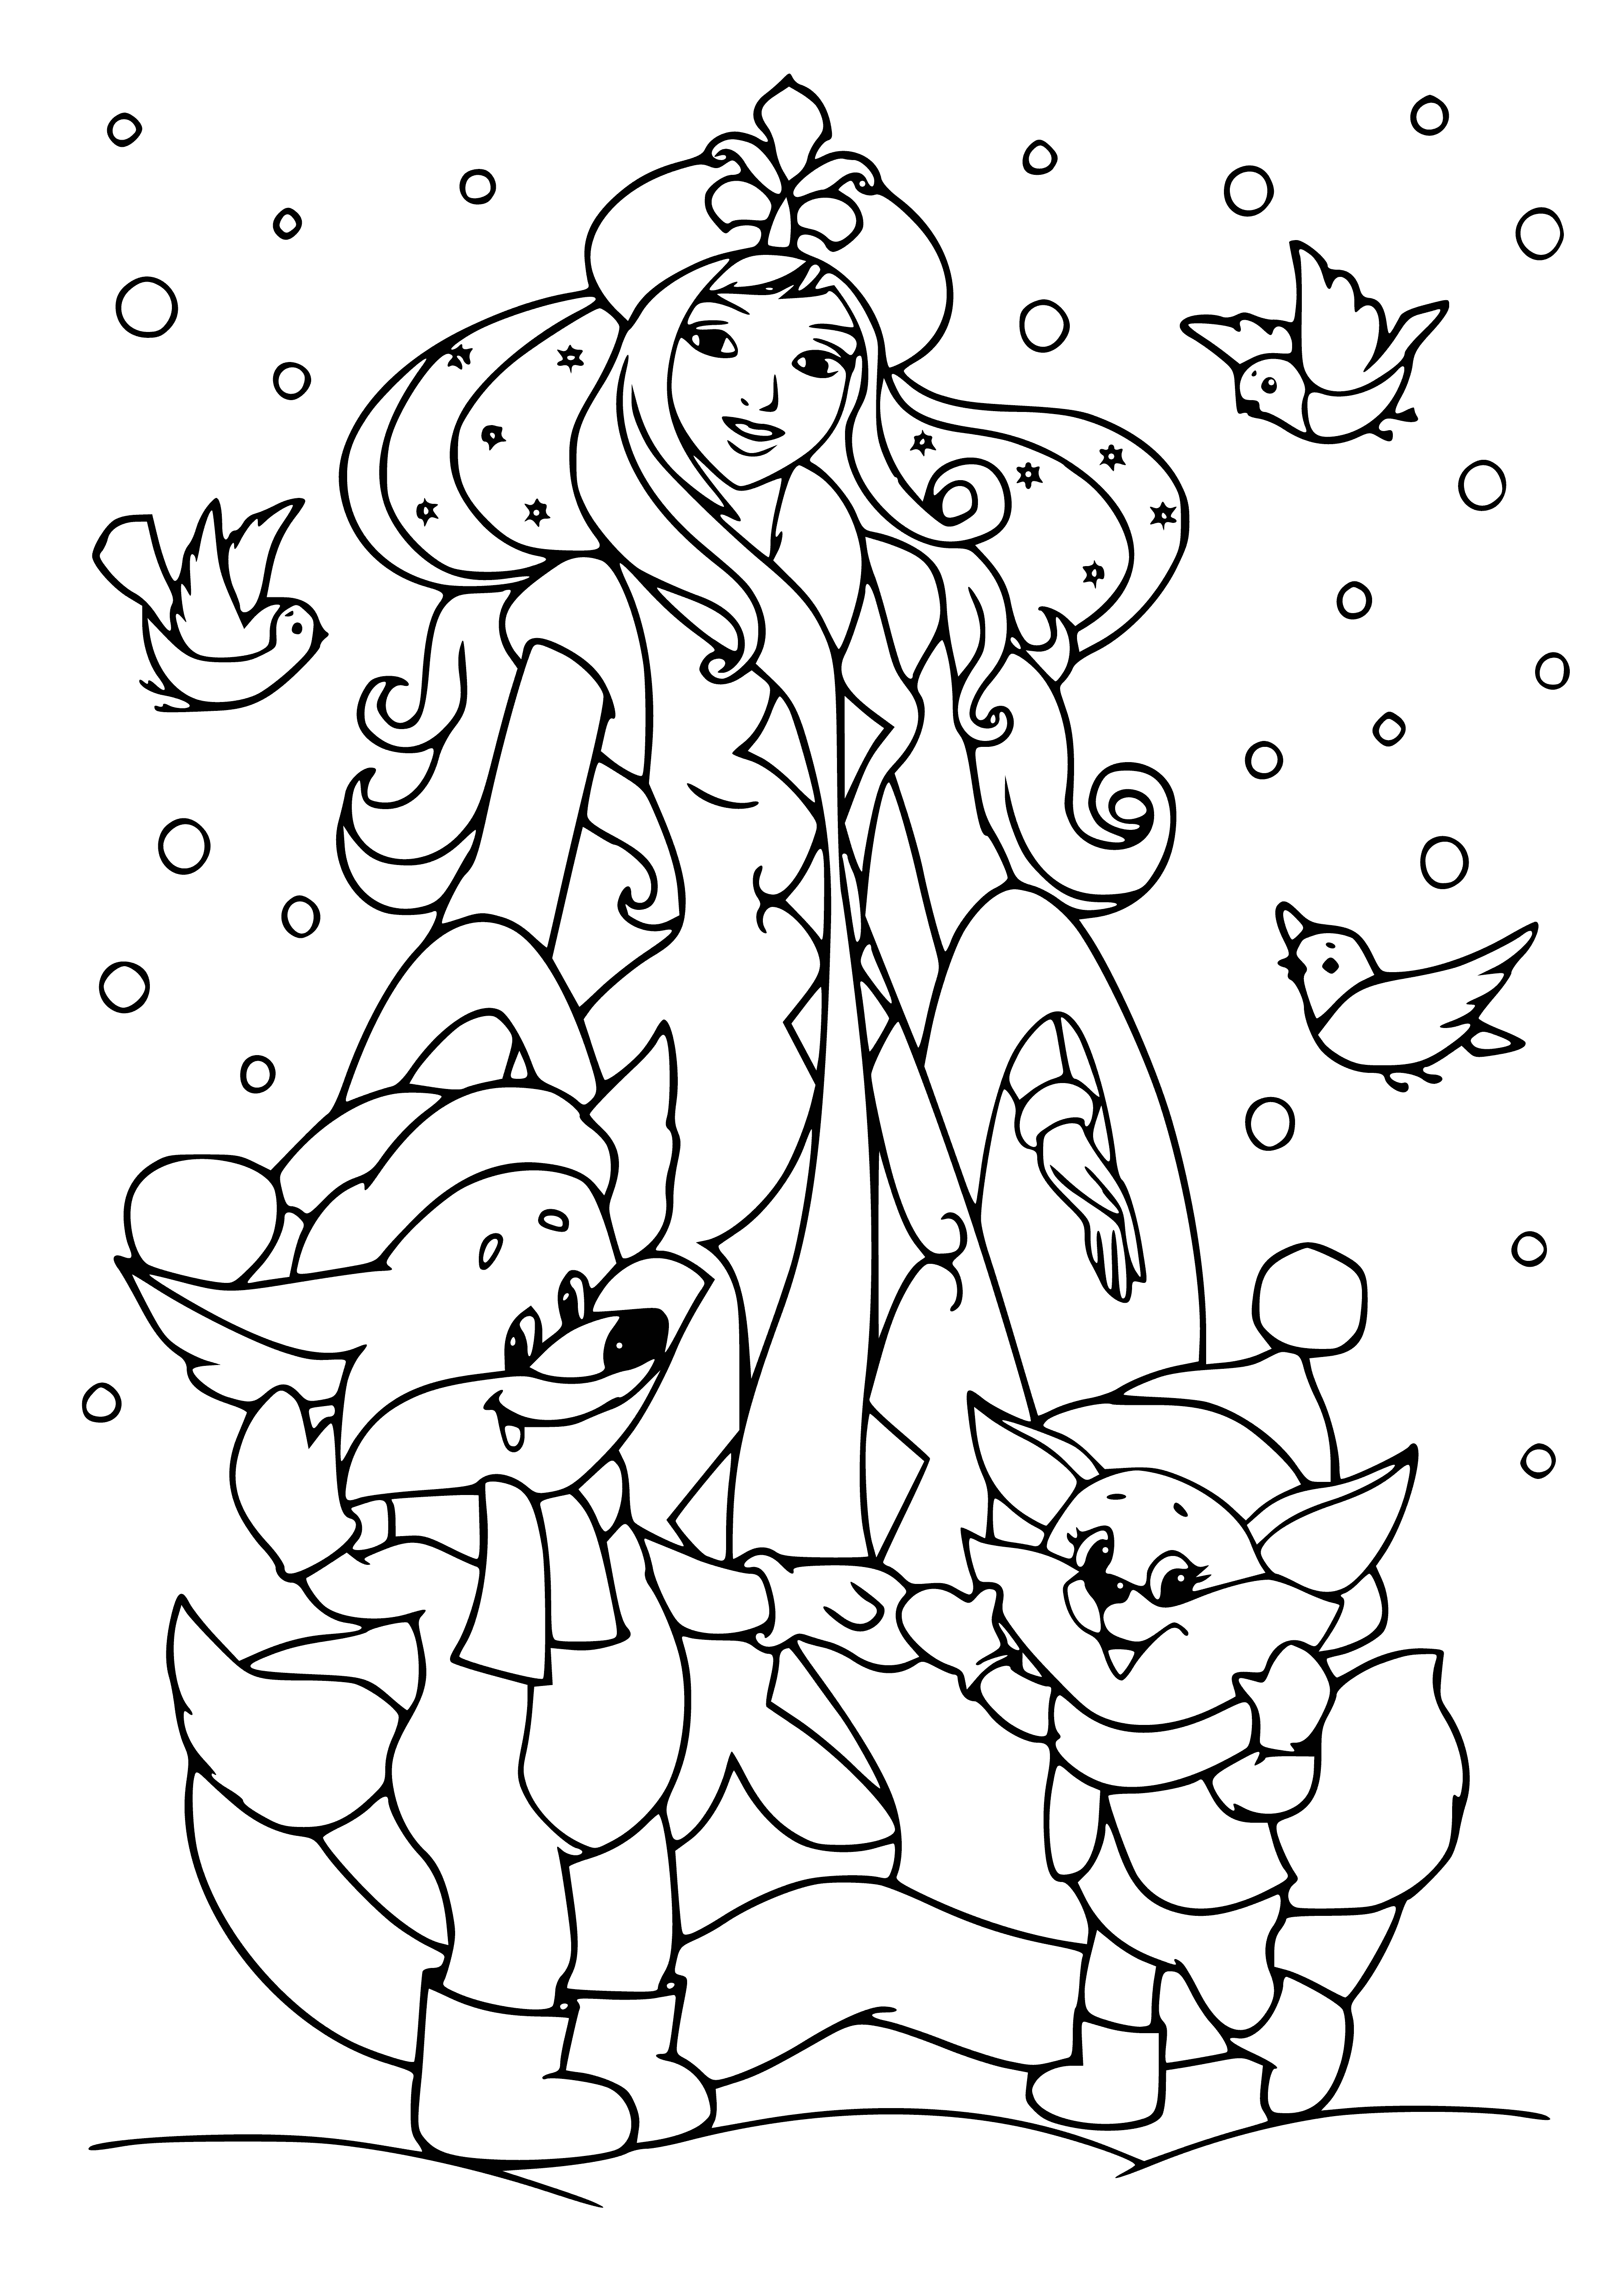 coloring page: Snow Maiden stands in snow with animals; wears white dress, scarf and blue ribbon; holds broom in hand.